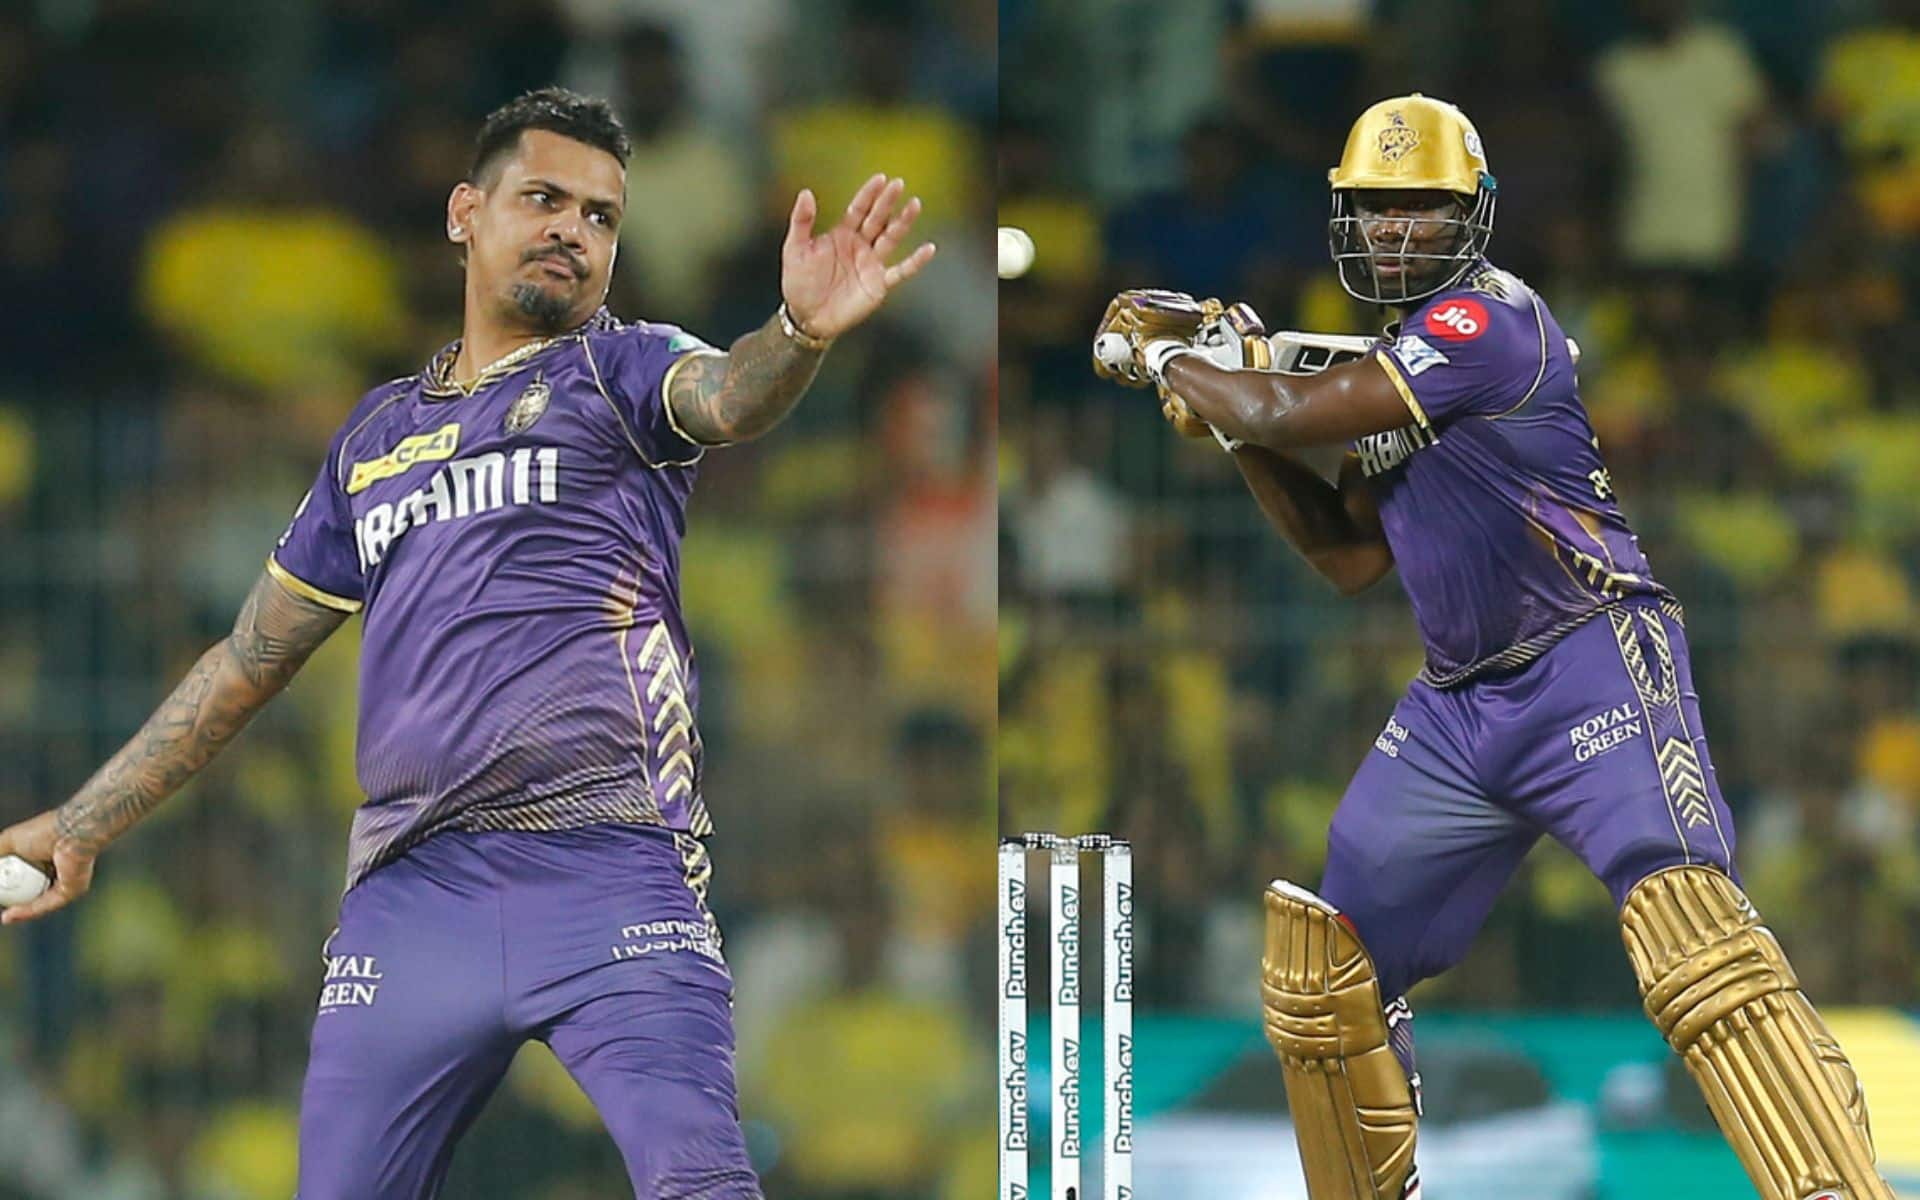 Sunil Narine and Andre Russell could be the match-winner for KKR